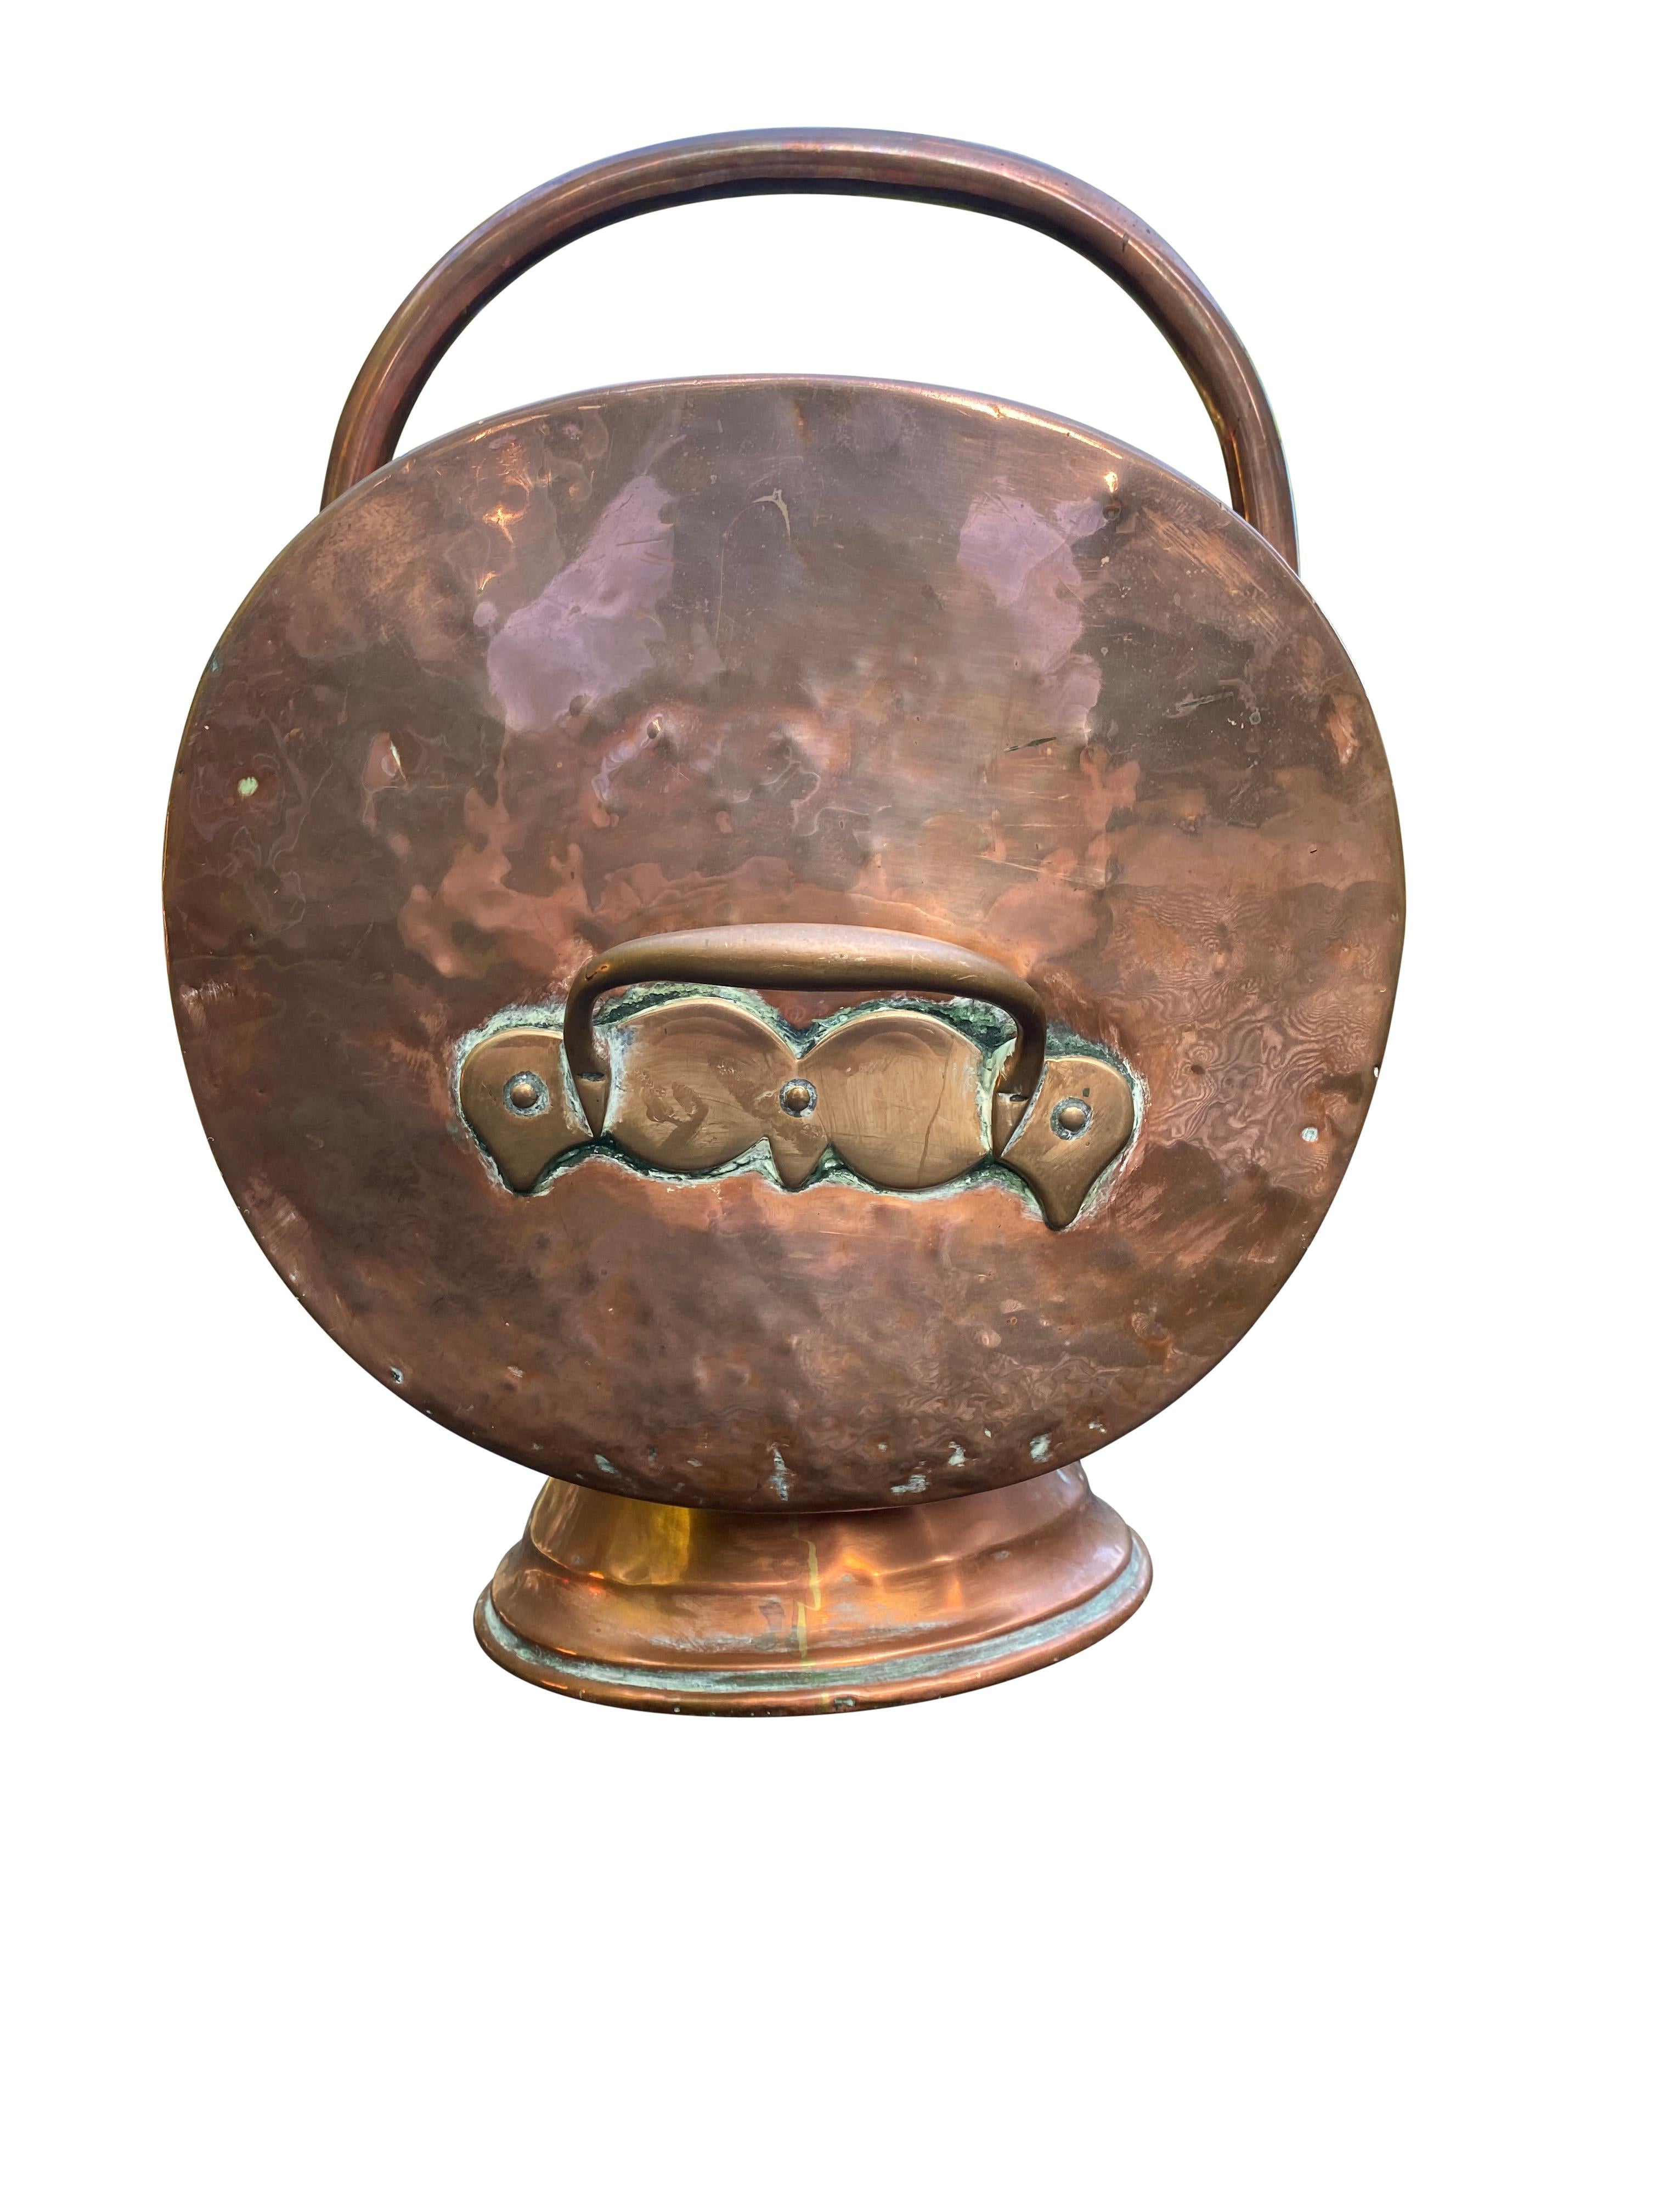 Victorian Riveted Copper Brass Coal Bucket with Handled Helmet, 19th Century For Sale 3